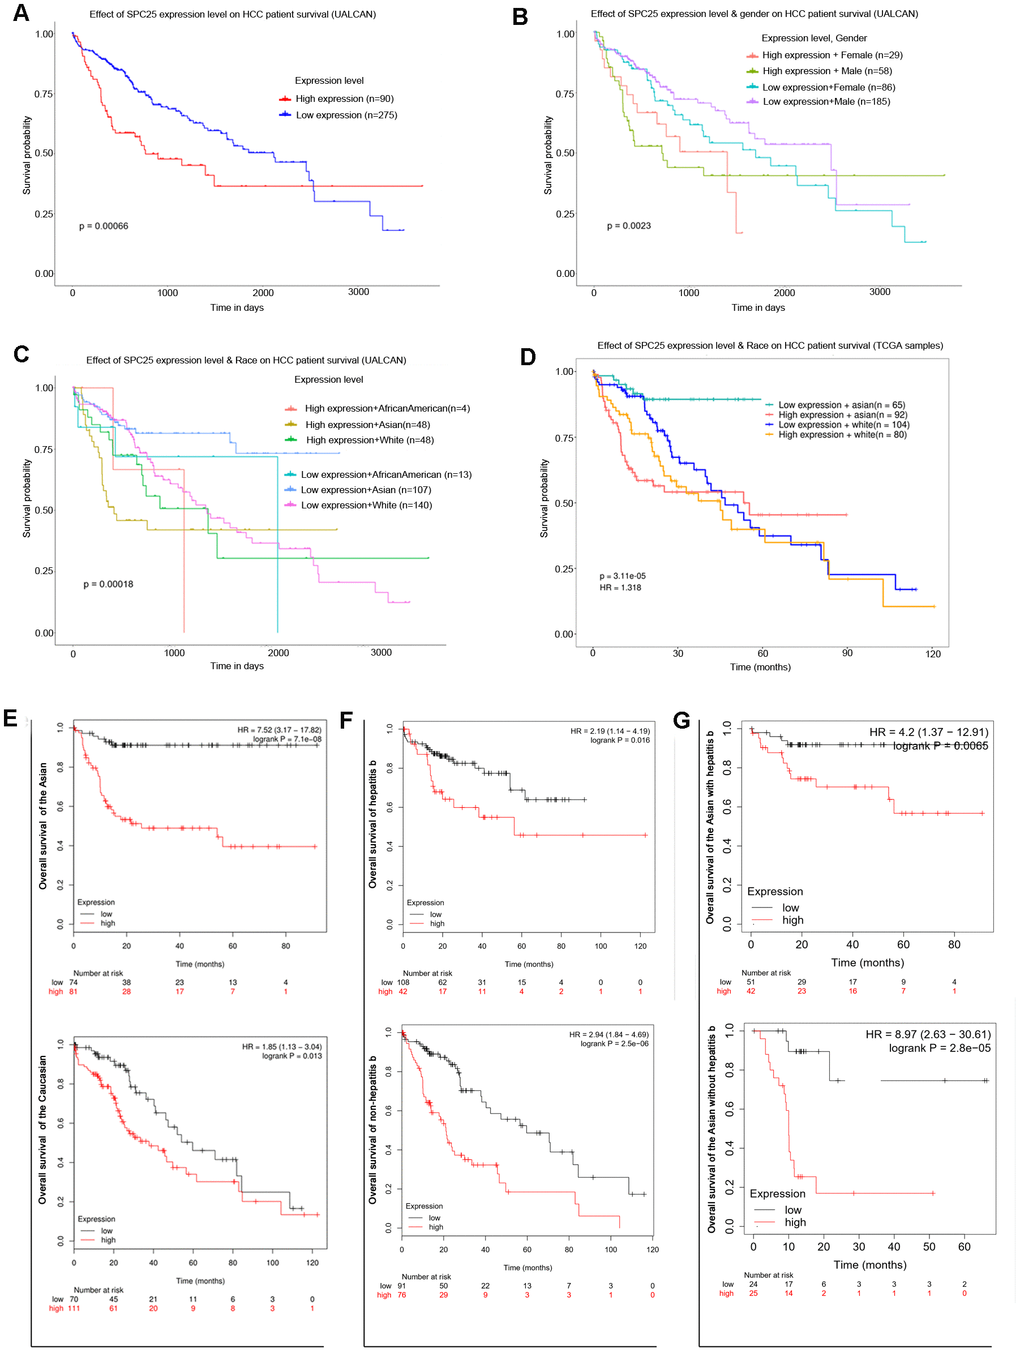 Prognostic role of SPC25 mRNA in HCC patients. (A) Effect of SPC25 expression level on HCC patient survival (UALCAN). (B) Effect of SPC25 expression level and gender on HCC patient survival (UALCAN). (C) Effect of SPC25 expression level and Race on HCC patient survival (UALCAN). (D) Effect of SPC25 expression level and Race on HCC patient survival (TCGA samples). (E) Subgroup overall survival analysis of SPC25 mRNA level in Asian or Caucasian HCC patients. (F) Subgroup overall survival analysis of SPC25 mRNA level in HCC patients with or without hepatitis b. (G) Subgroup overall survival analysis of SPC25 mRNA level in Asian HCC patients with or without hepatitis b.